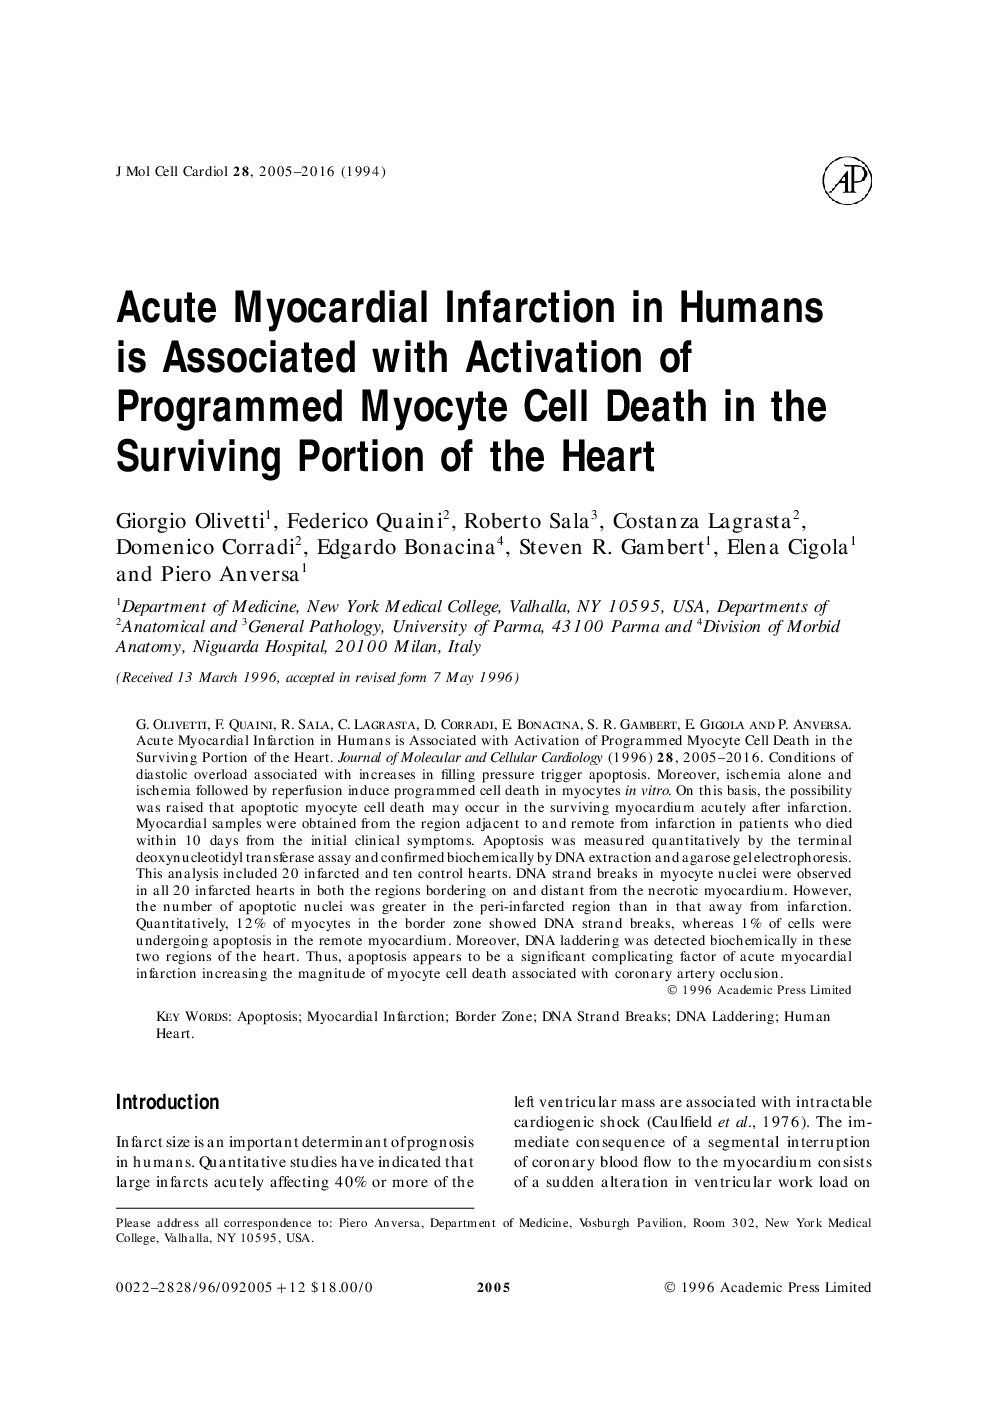 Acute Myocardial Infarction in Humans is Associated with Activation of Programmed Myocyte Cell Death in the Surviving Portion of the Heart 